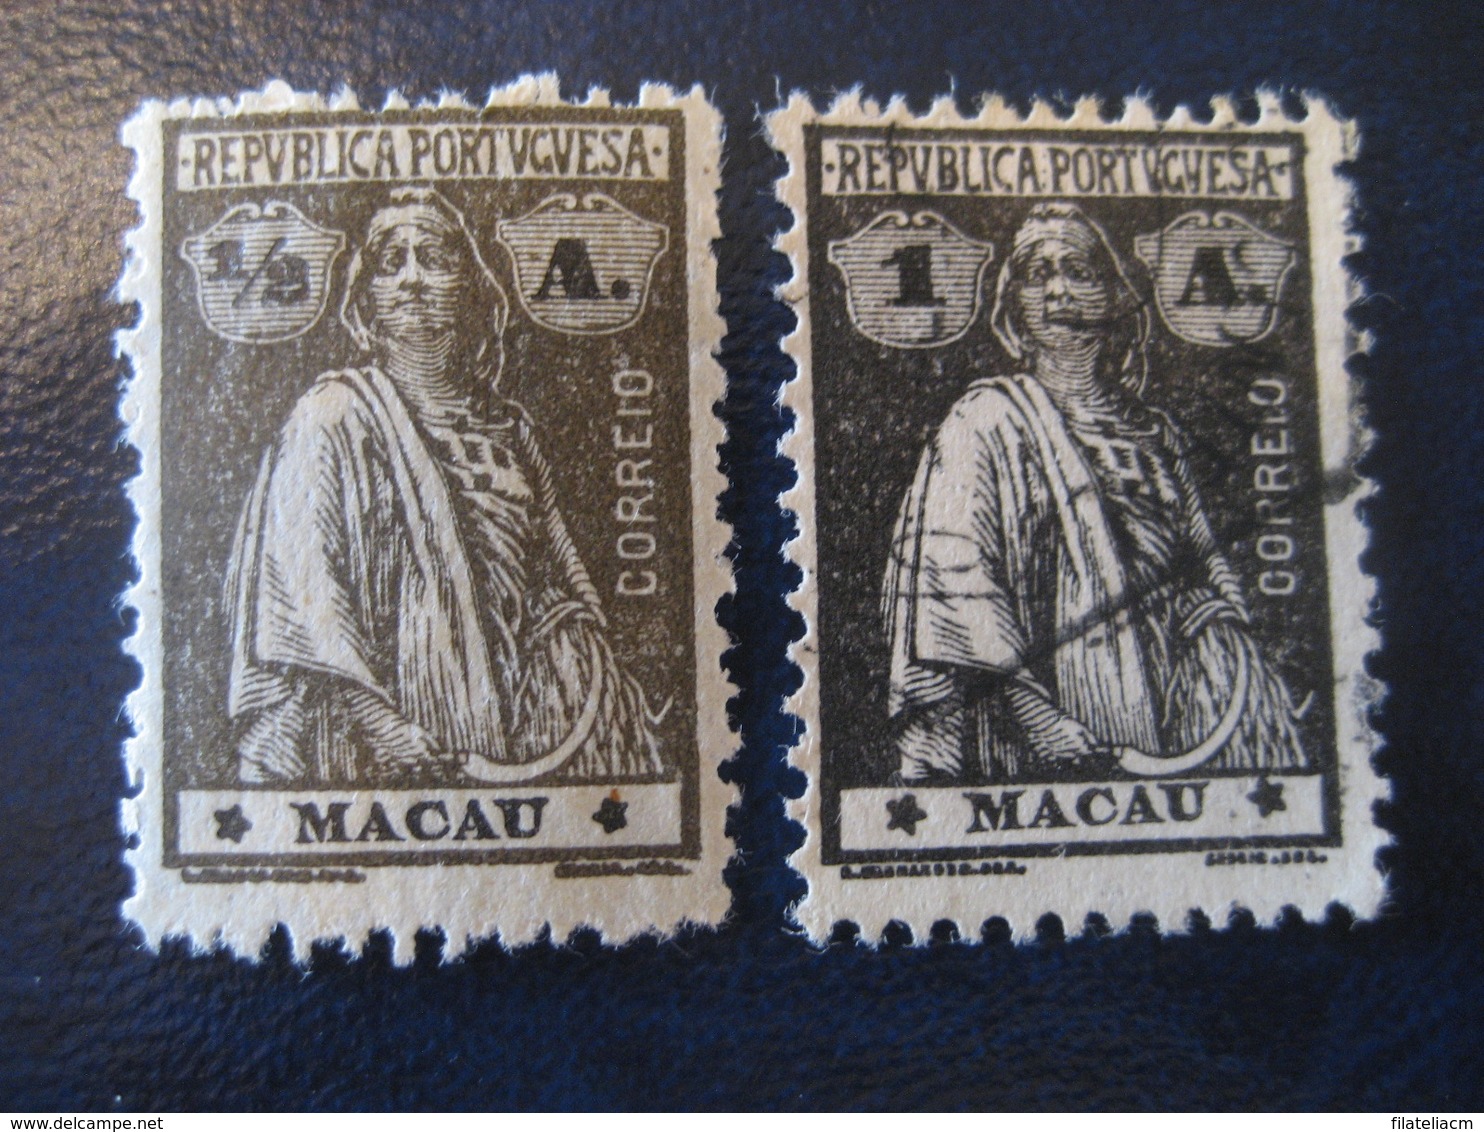 MACAU Ceres 1914/21 Yvert 210/1 (2 Stamp (1 Cancel) Perf 12x11 1/2 Cat. Year 2008: 3,50 Eur) Macao Portugal China Area - Oblitérés